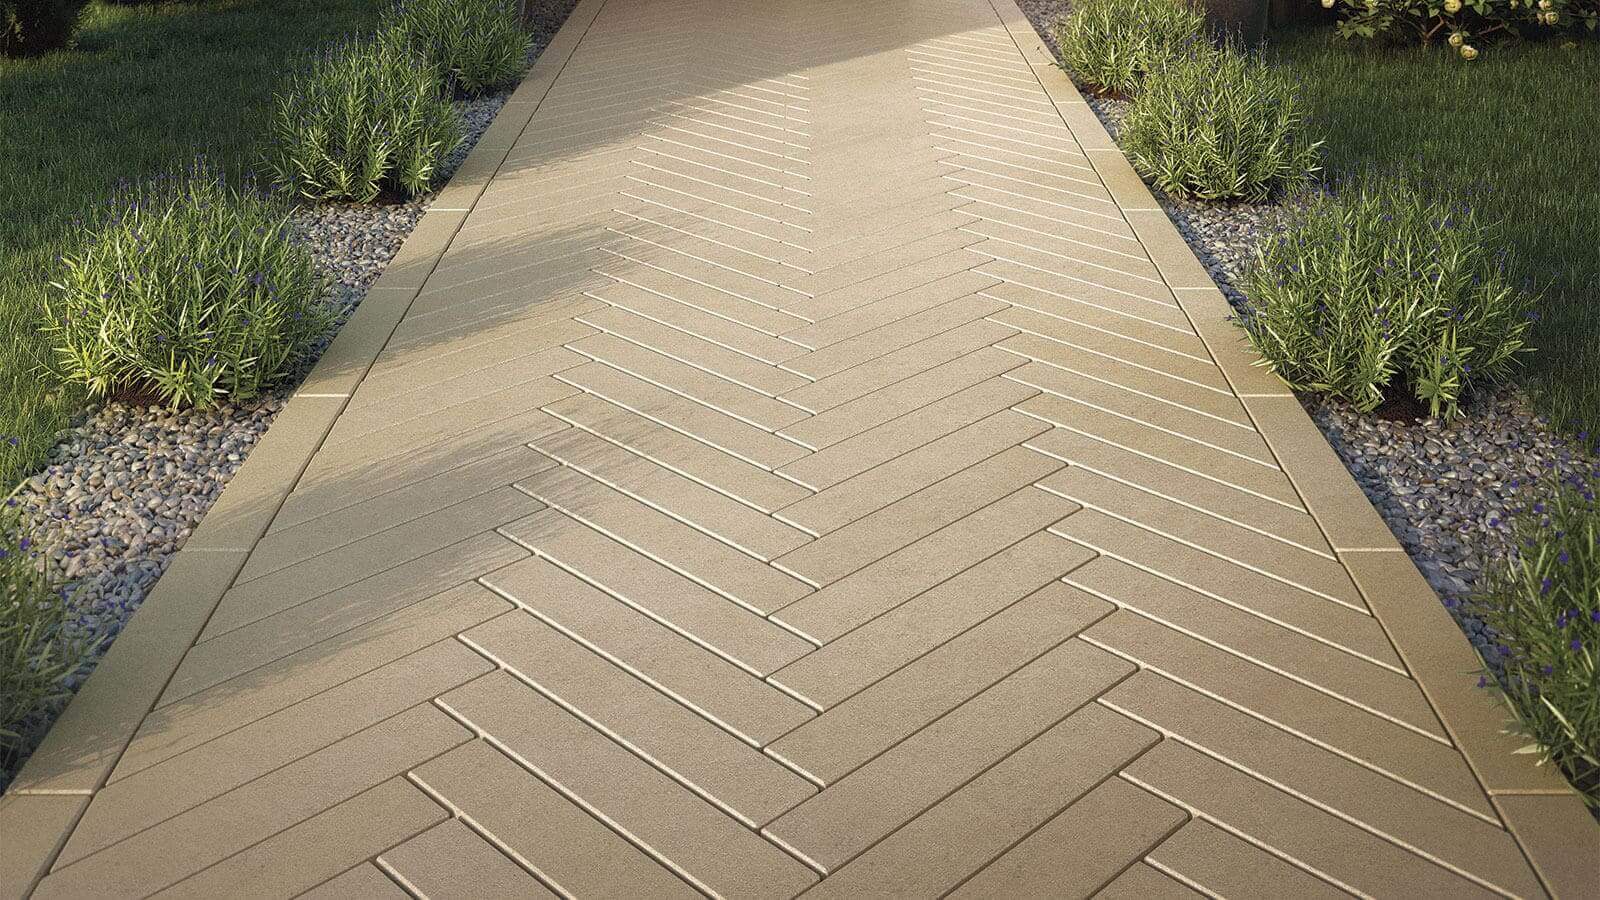 plank pavers walkways and patios products polycor hardscapes and masonry